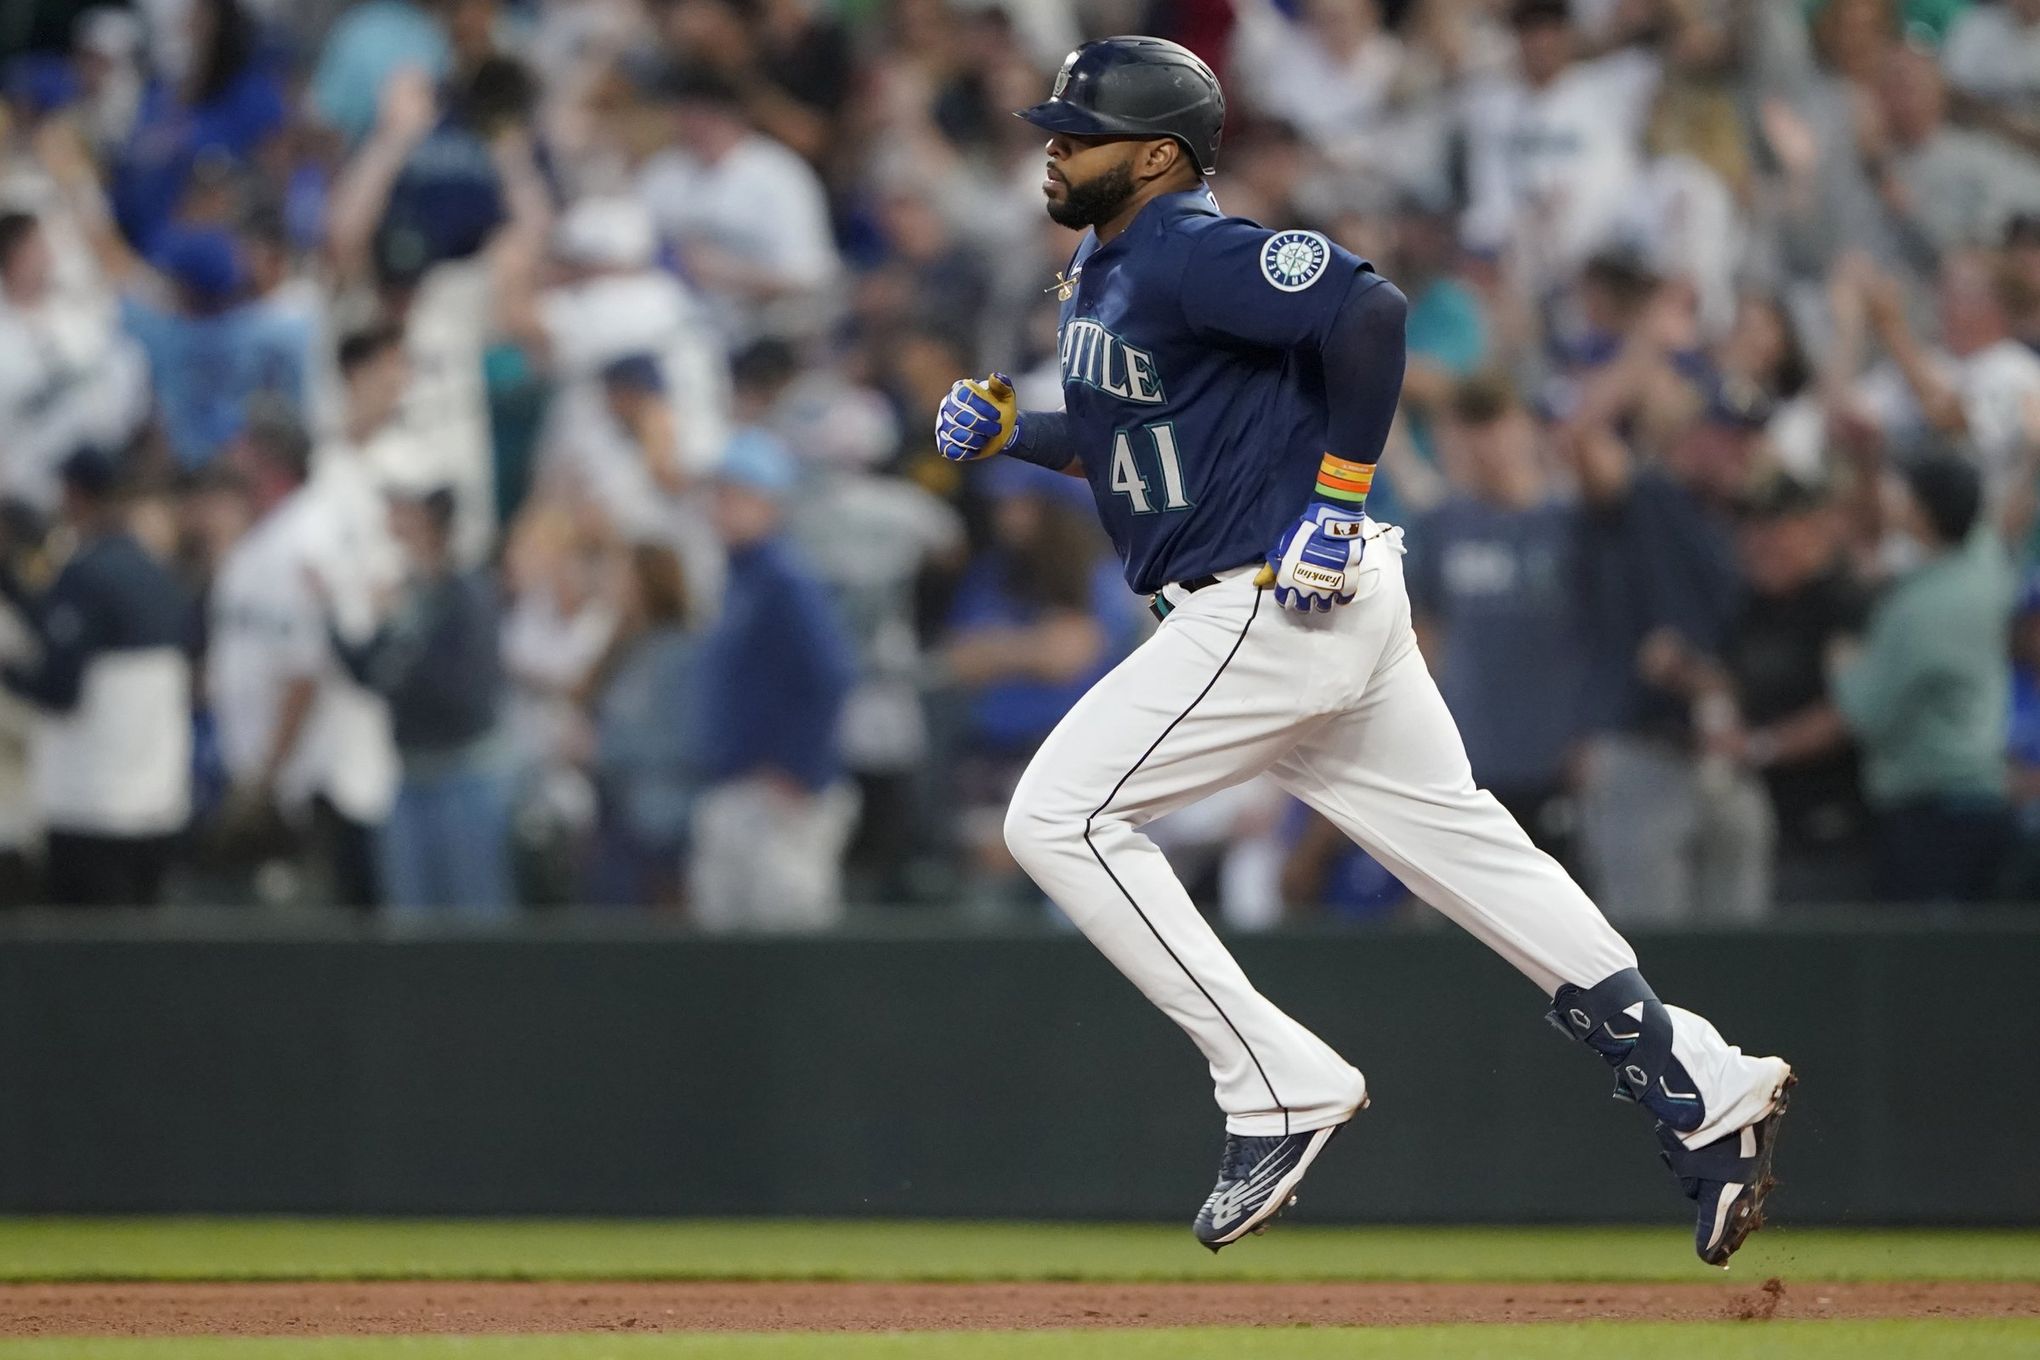 Mariners sweep the Blue Jays powered by Carlos Santana's two home